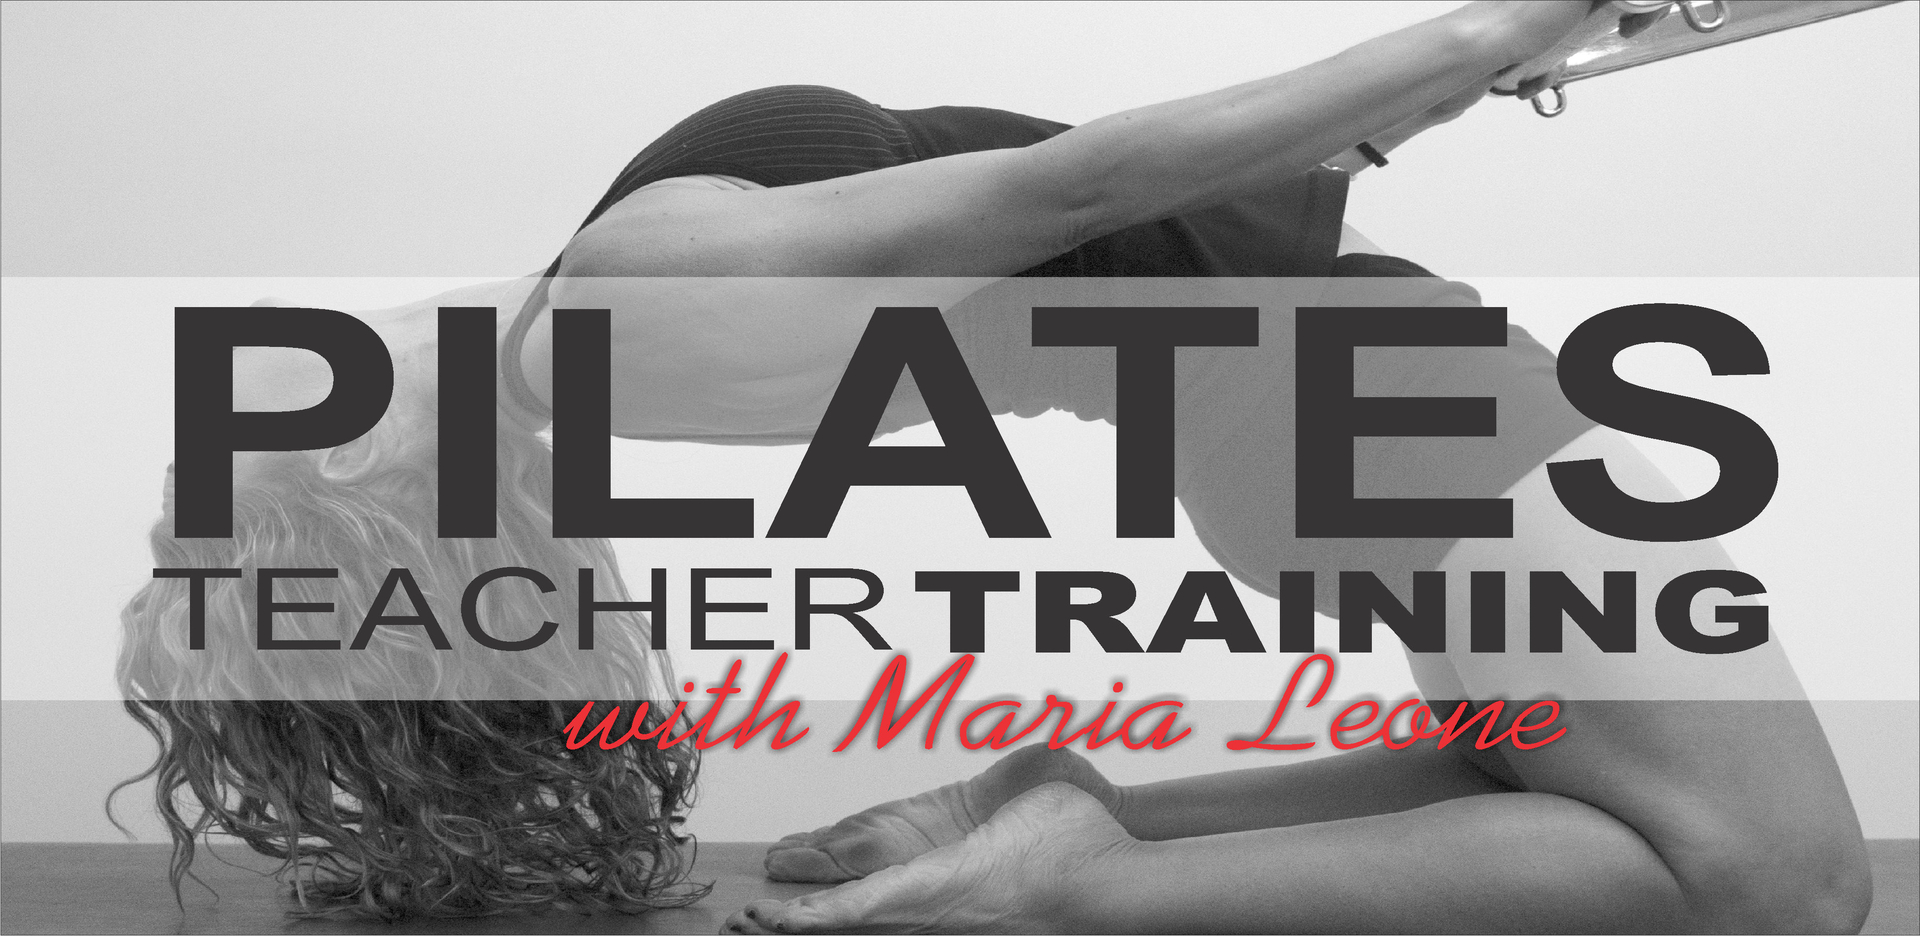 Bodyline Pilates And Pilates Certification